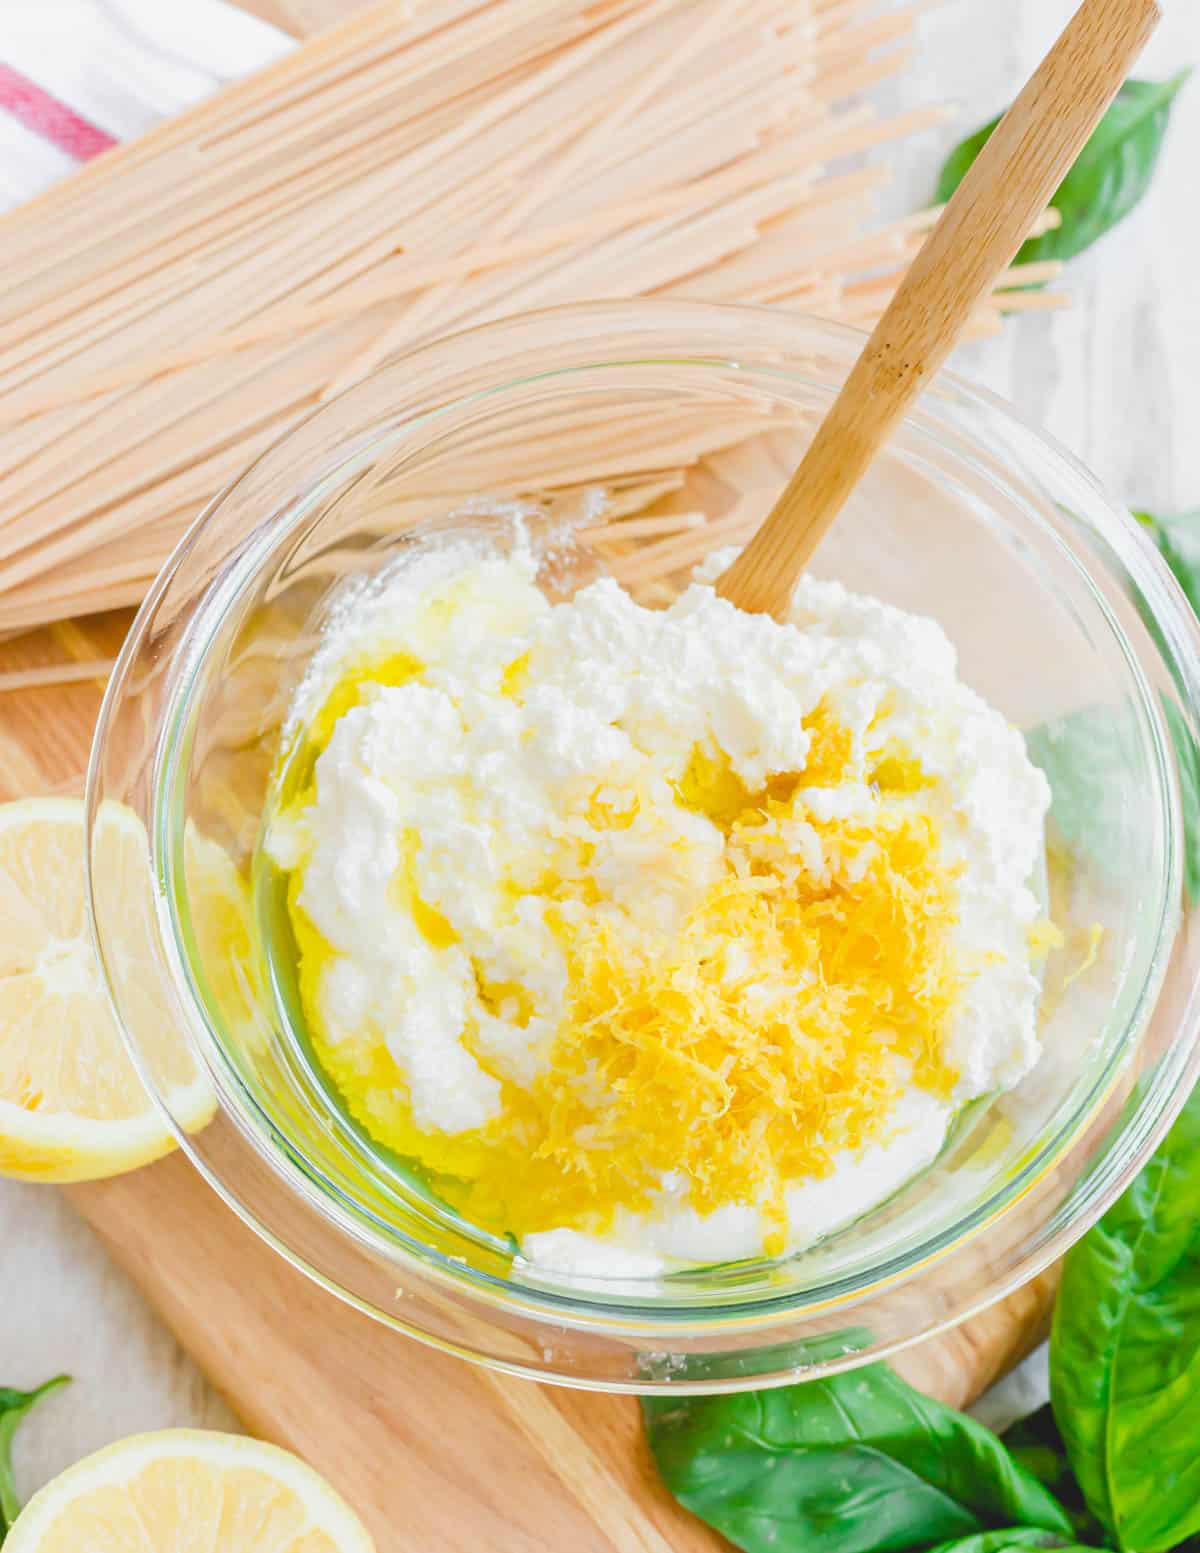 Making lemon ricotta sauce in a glass bowl with fresh lemon and basil on the side.